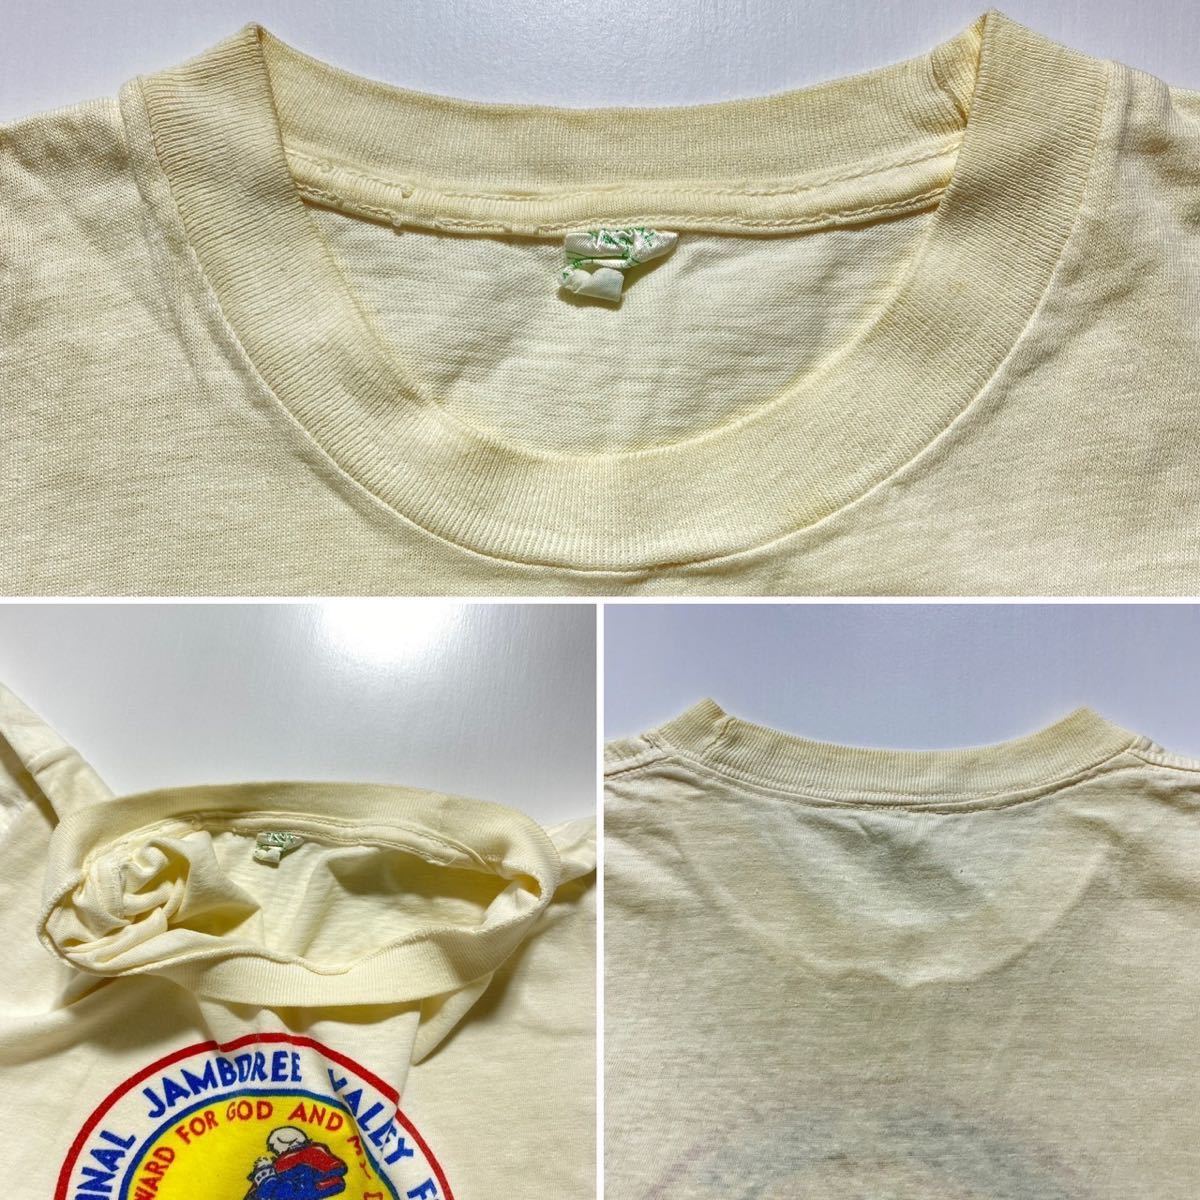 【L】50s Vintage NATIONAL JAMBOREE VALLEY FORGE Tee 50年代 ヴィンテージ ボーイスカウト 染み込みプリント Tシャツ USA製 G1960_画像3